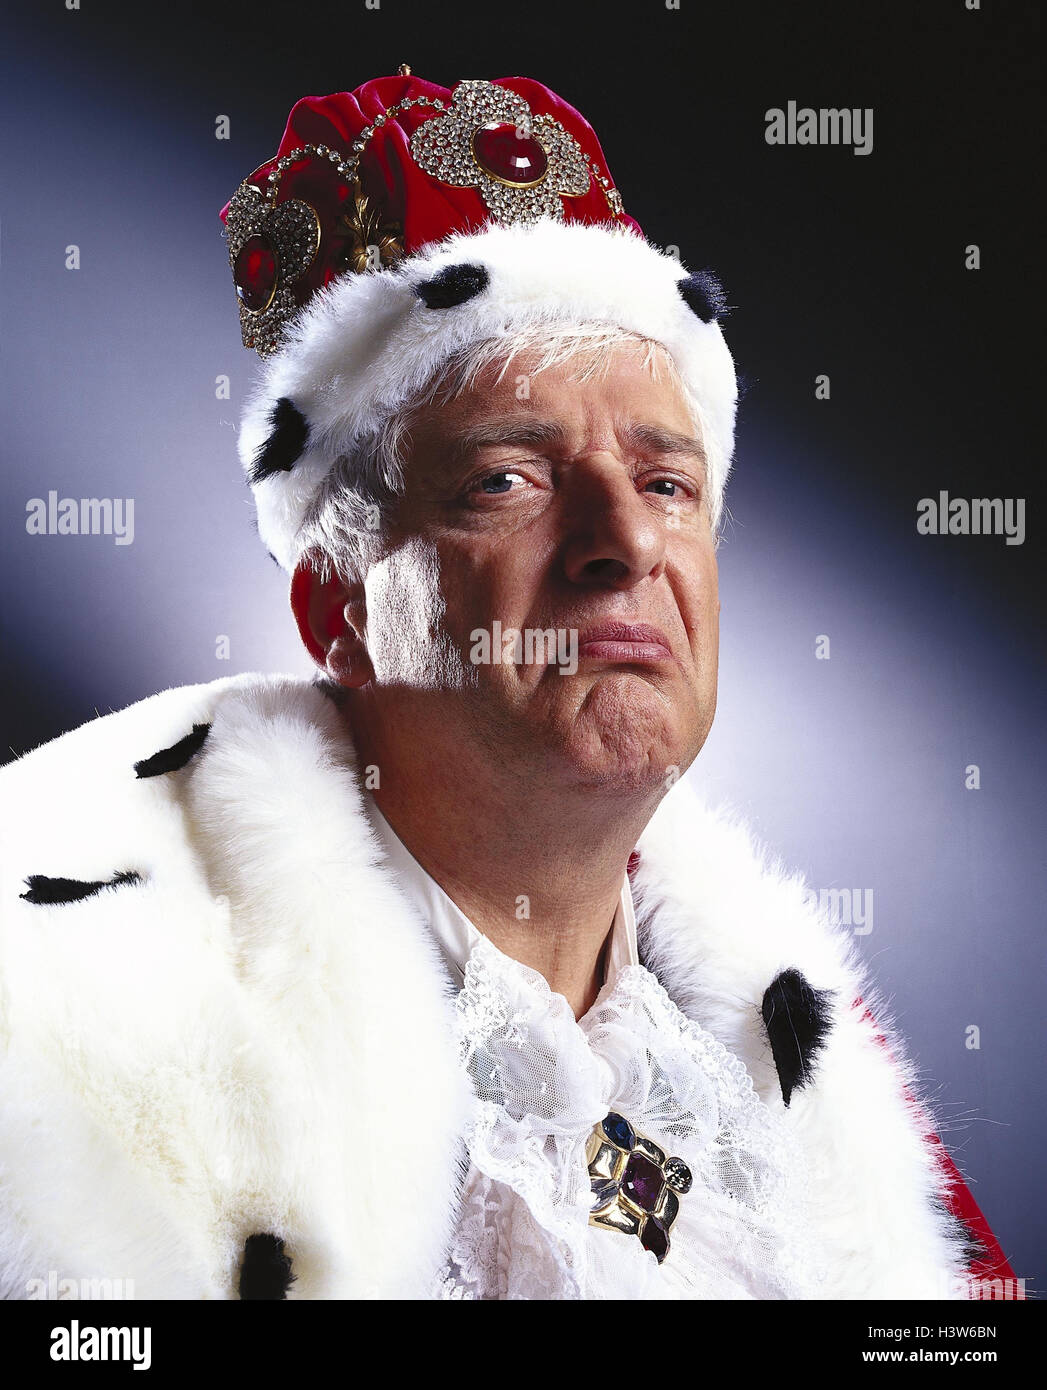 King, portrait, facial play mb 280 A5 Stock Photo